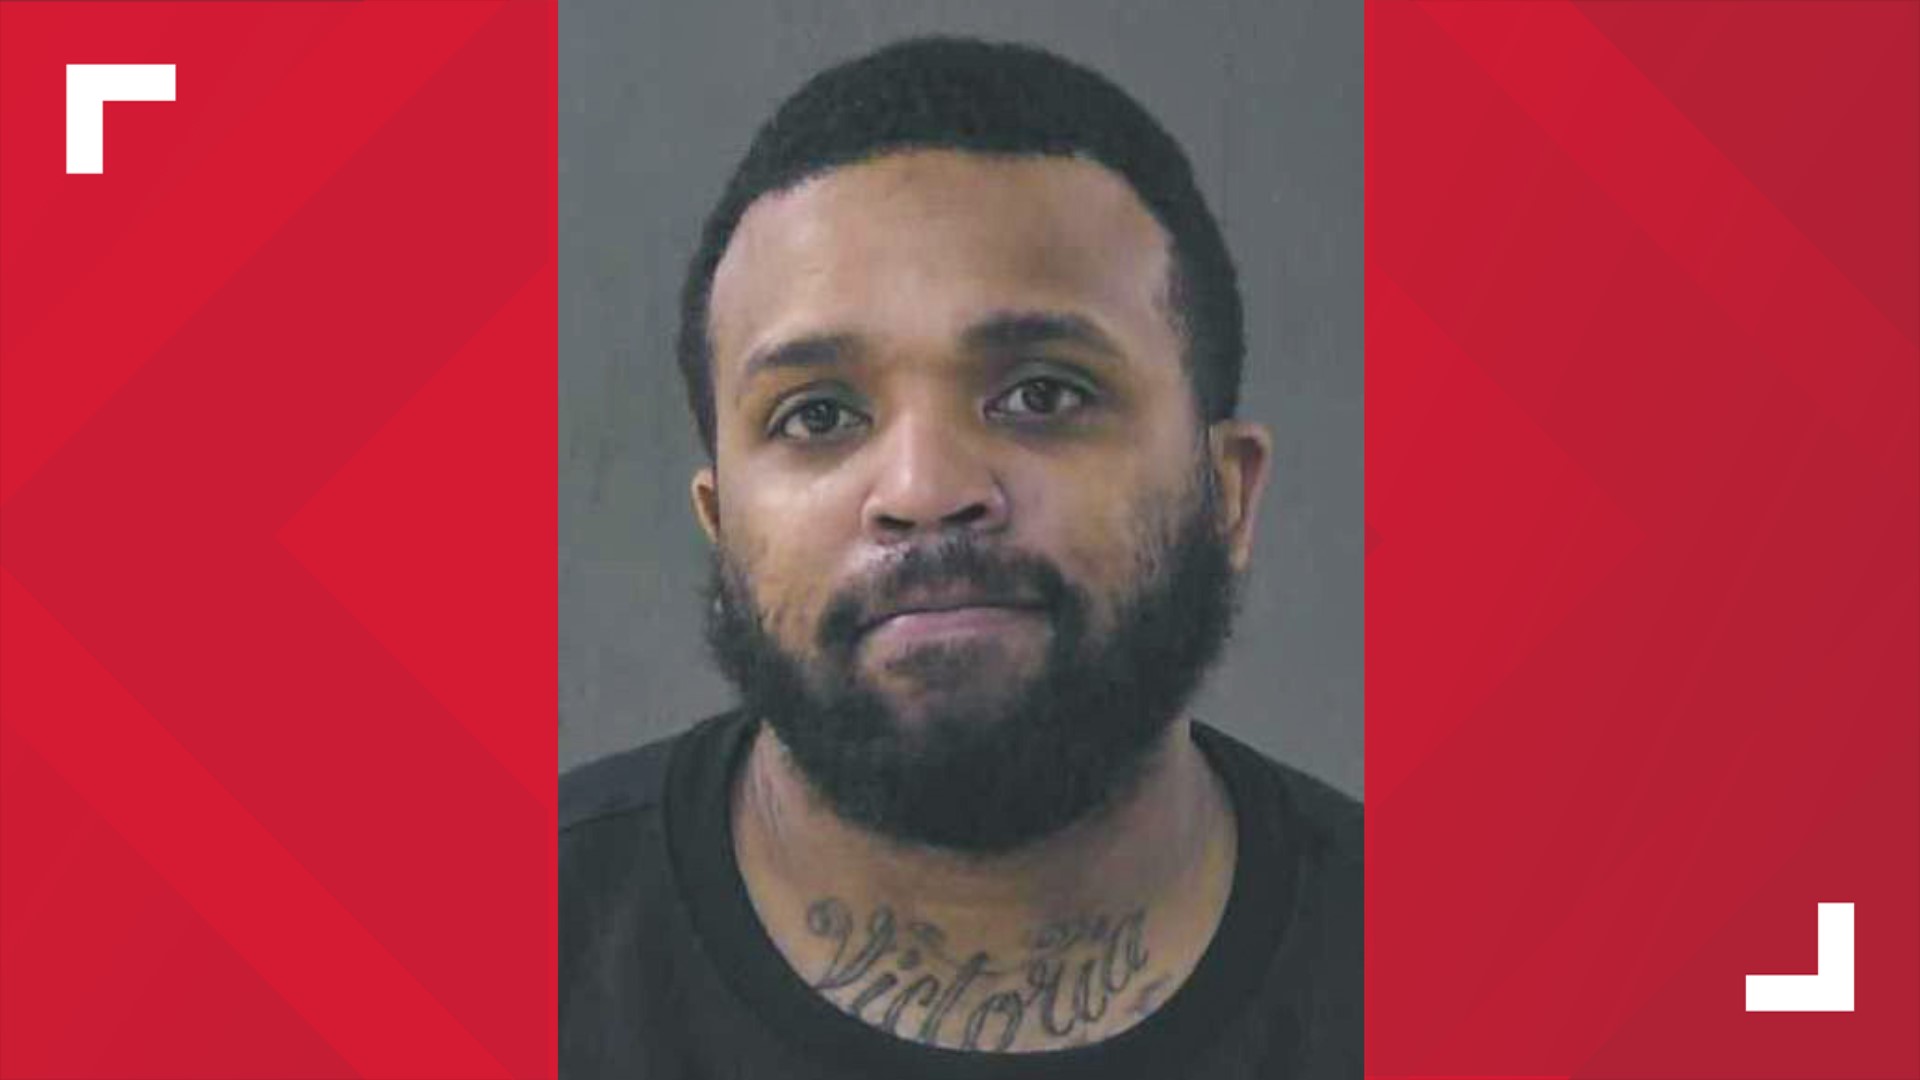 Deangelo Tellis was sentenced to 16.5 to 22 years in prison for trafficking in drugs and engaging in a pattern of corrupt activity.